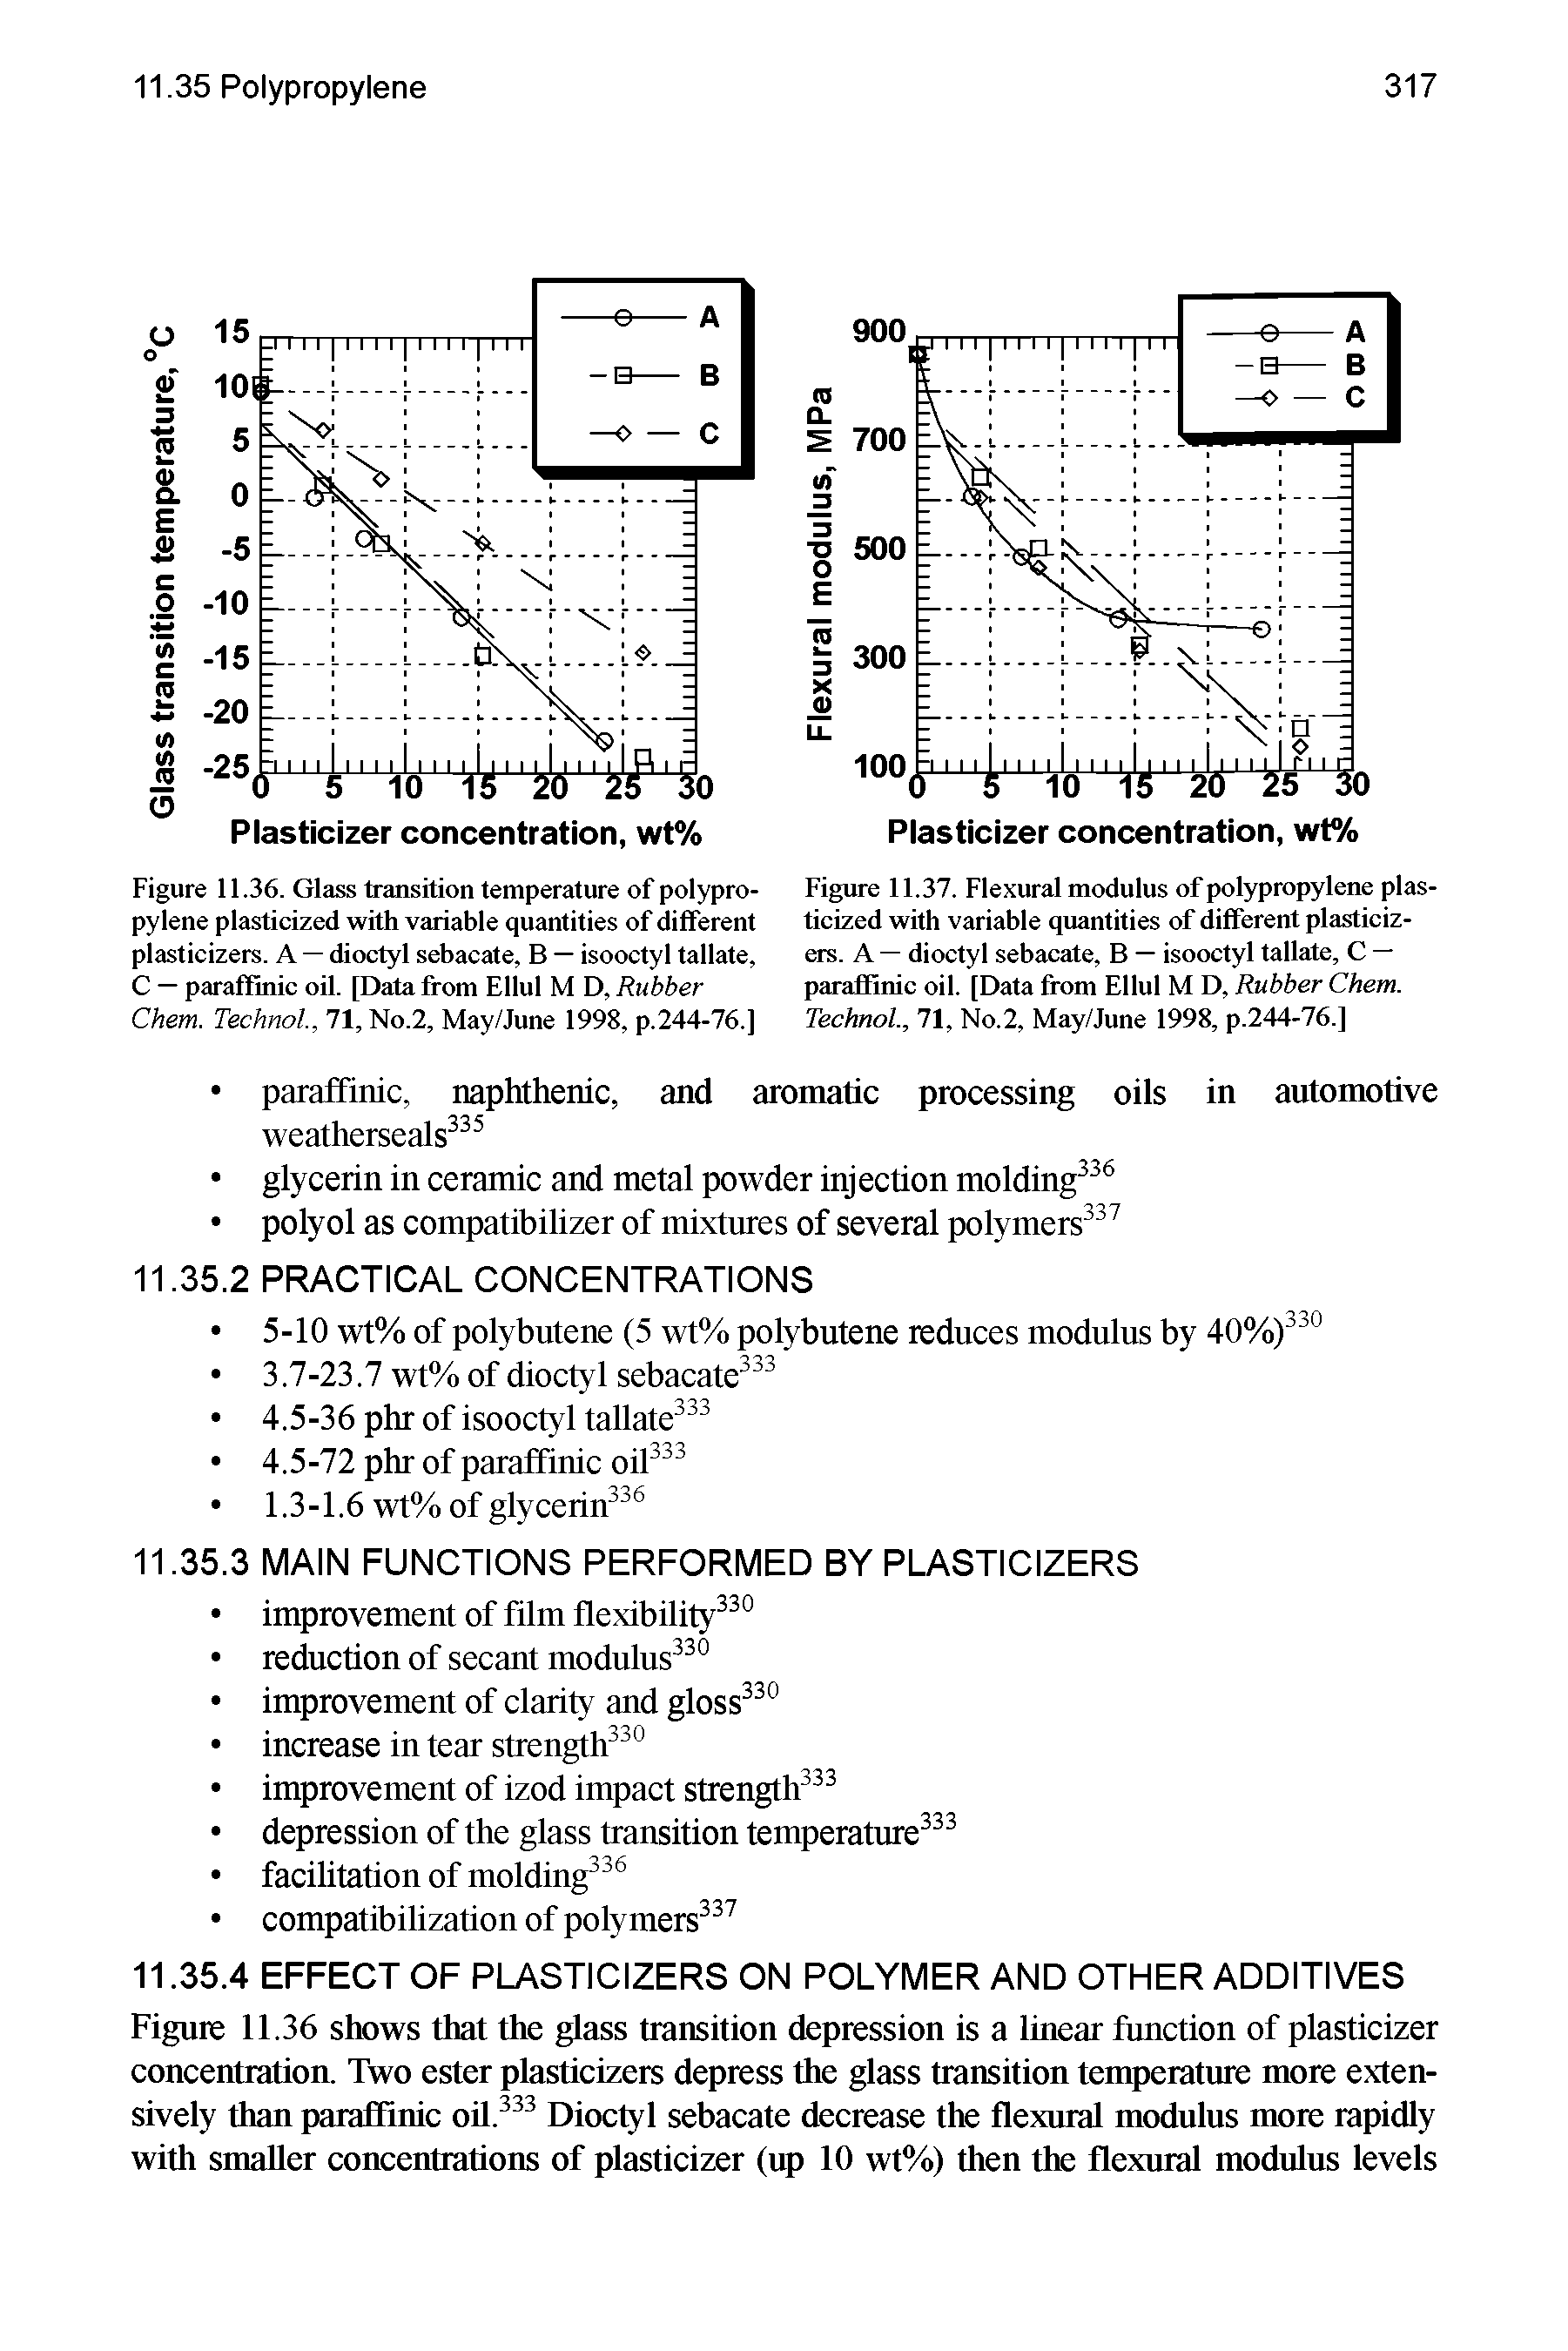 Figure 11.36. Glass transition temperature of polypropylene plasticized with variable quantities of different plasticizers. A — dioctyl sebacate, B — isooctyl tallate, C — paraffinic oil. [Data from Ellul M D, Rubber Chem. TechnoL, 71, No.2, May/June 1998, p.244-76.]...